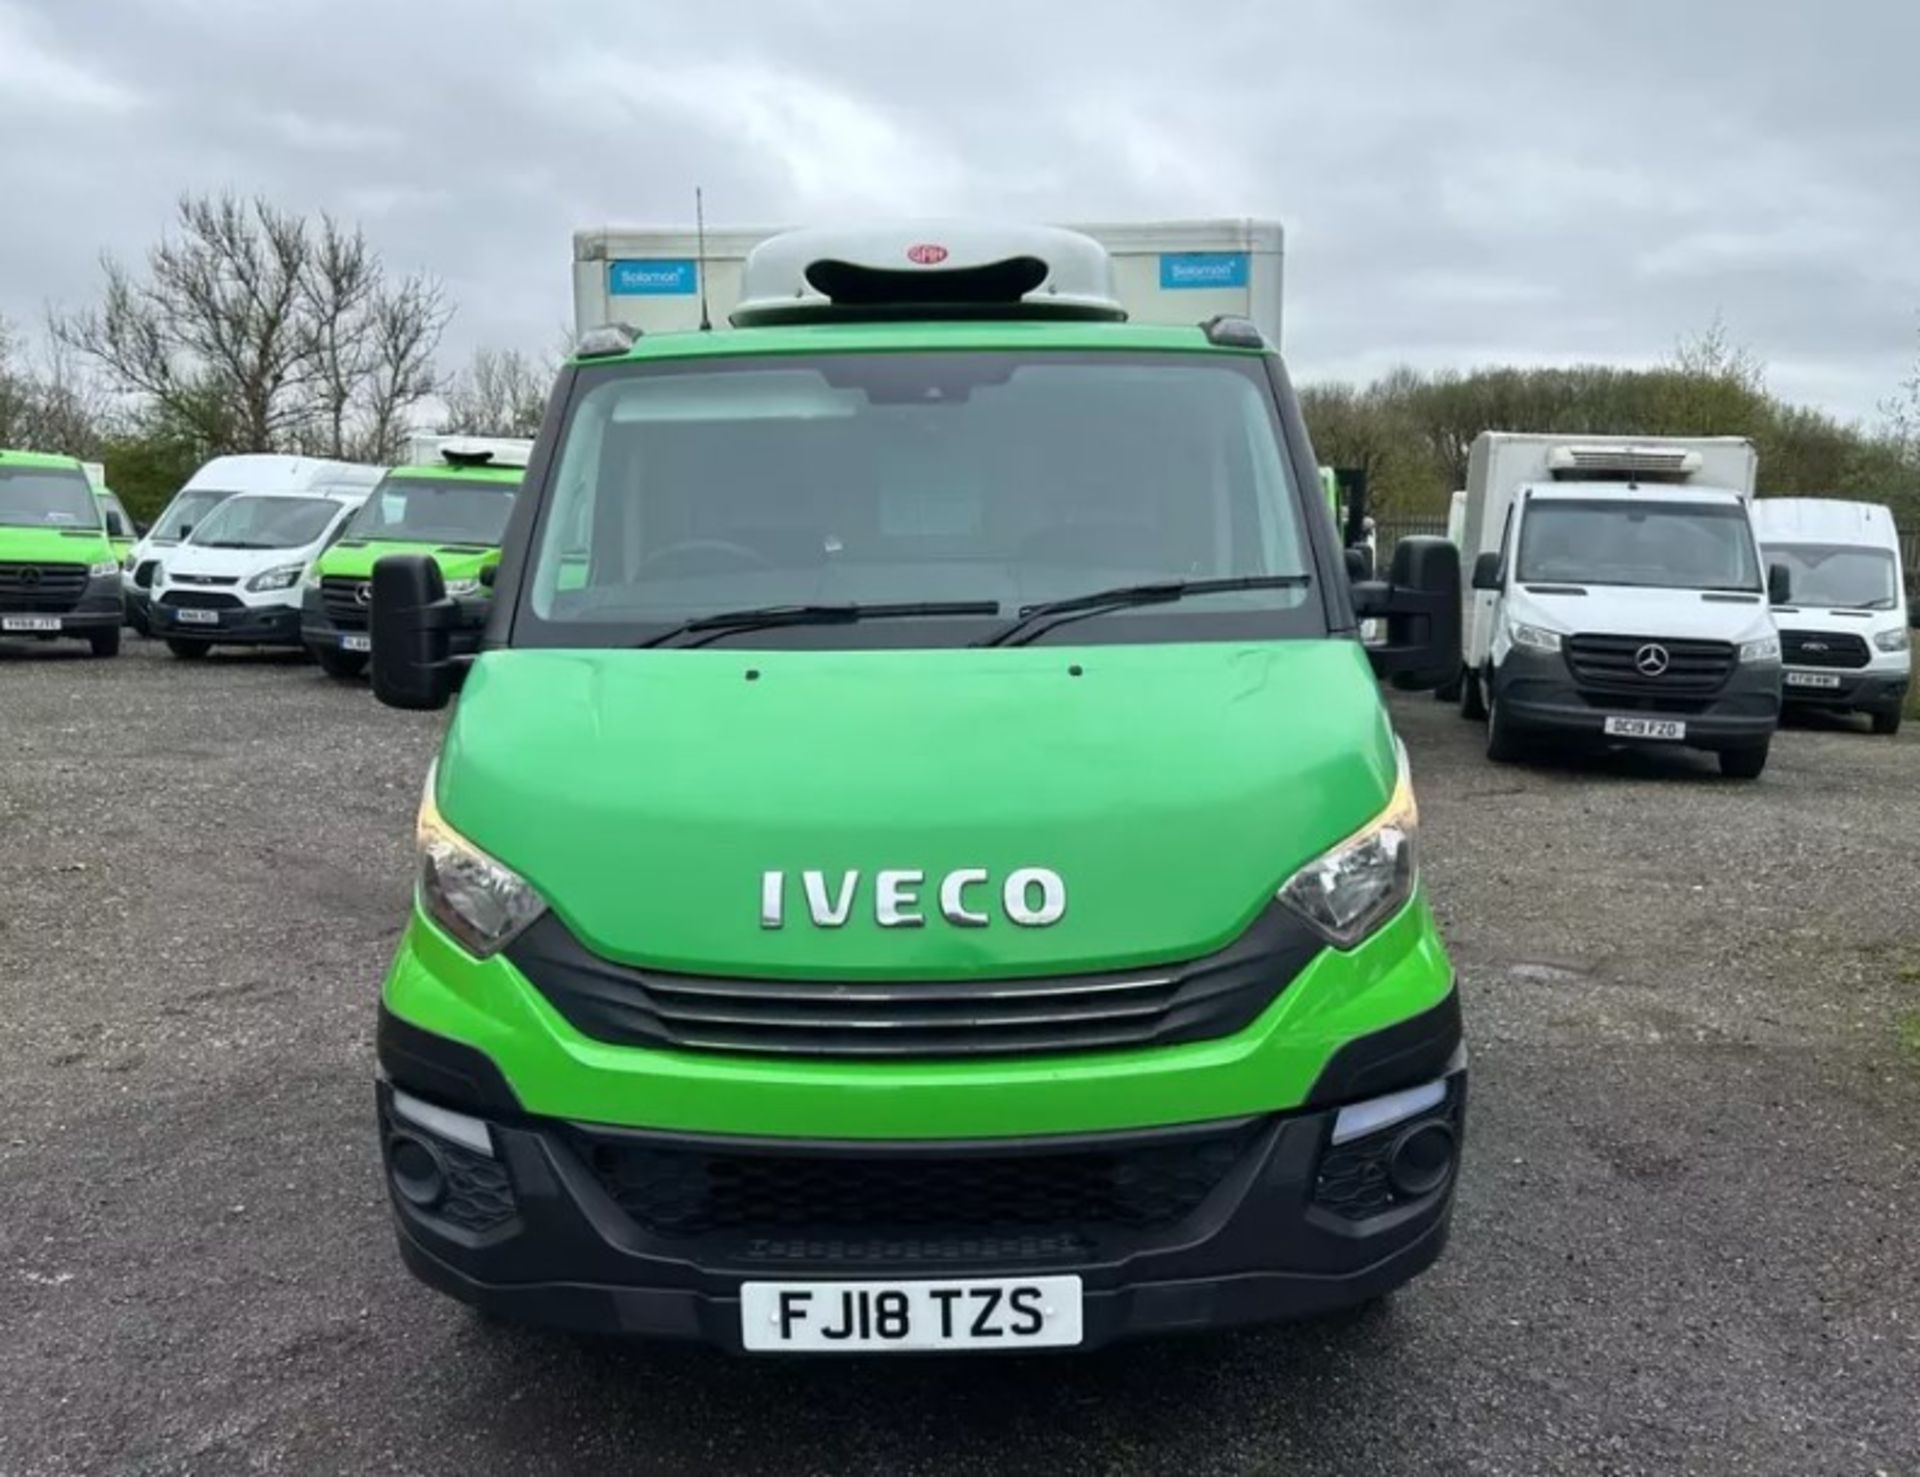 >>>SPECIAL CLEARANCE<<< EXCEPTIONAL PERFORMANCE: 2018 IVECO DAILY 35S12 CHASSIS CAB - Image 2 of 15